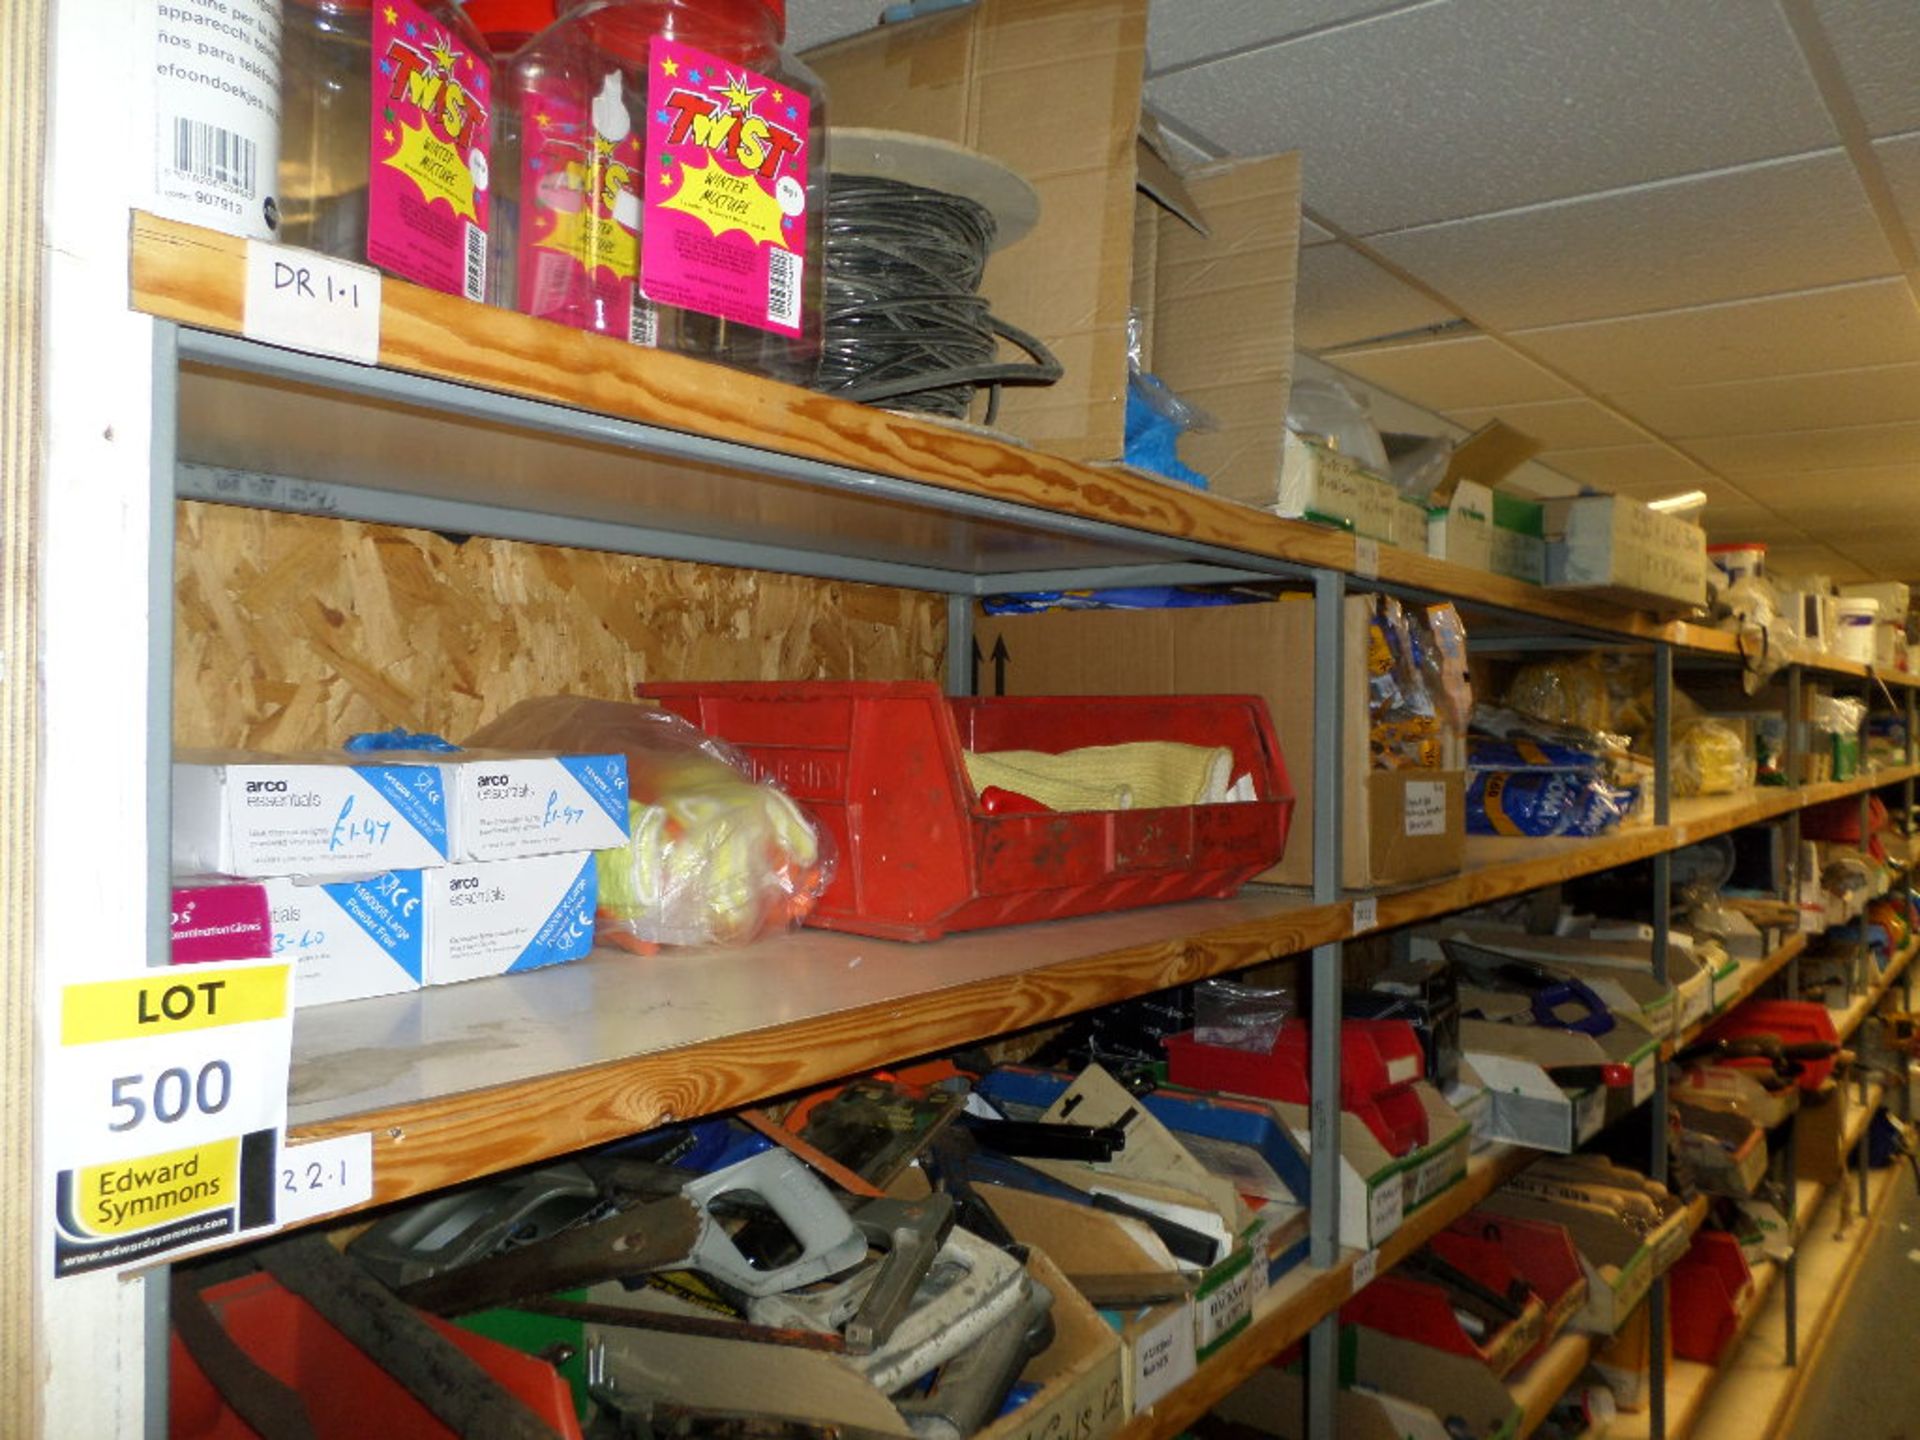 Contents to Rack D, tiers DR1 to DR2 mainly, PPE and janitorial supplies